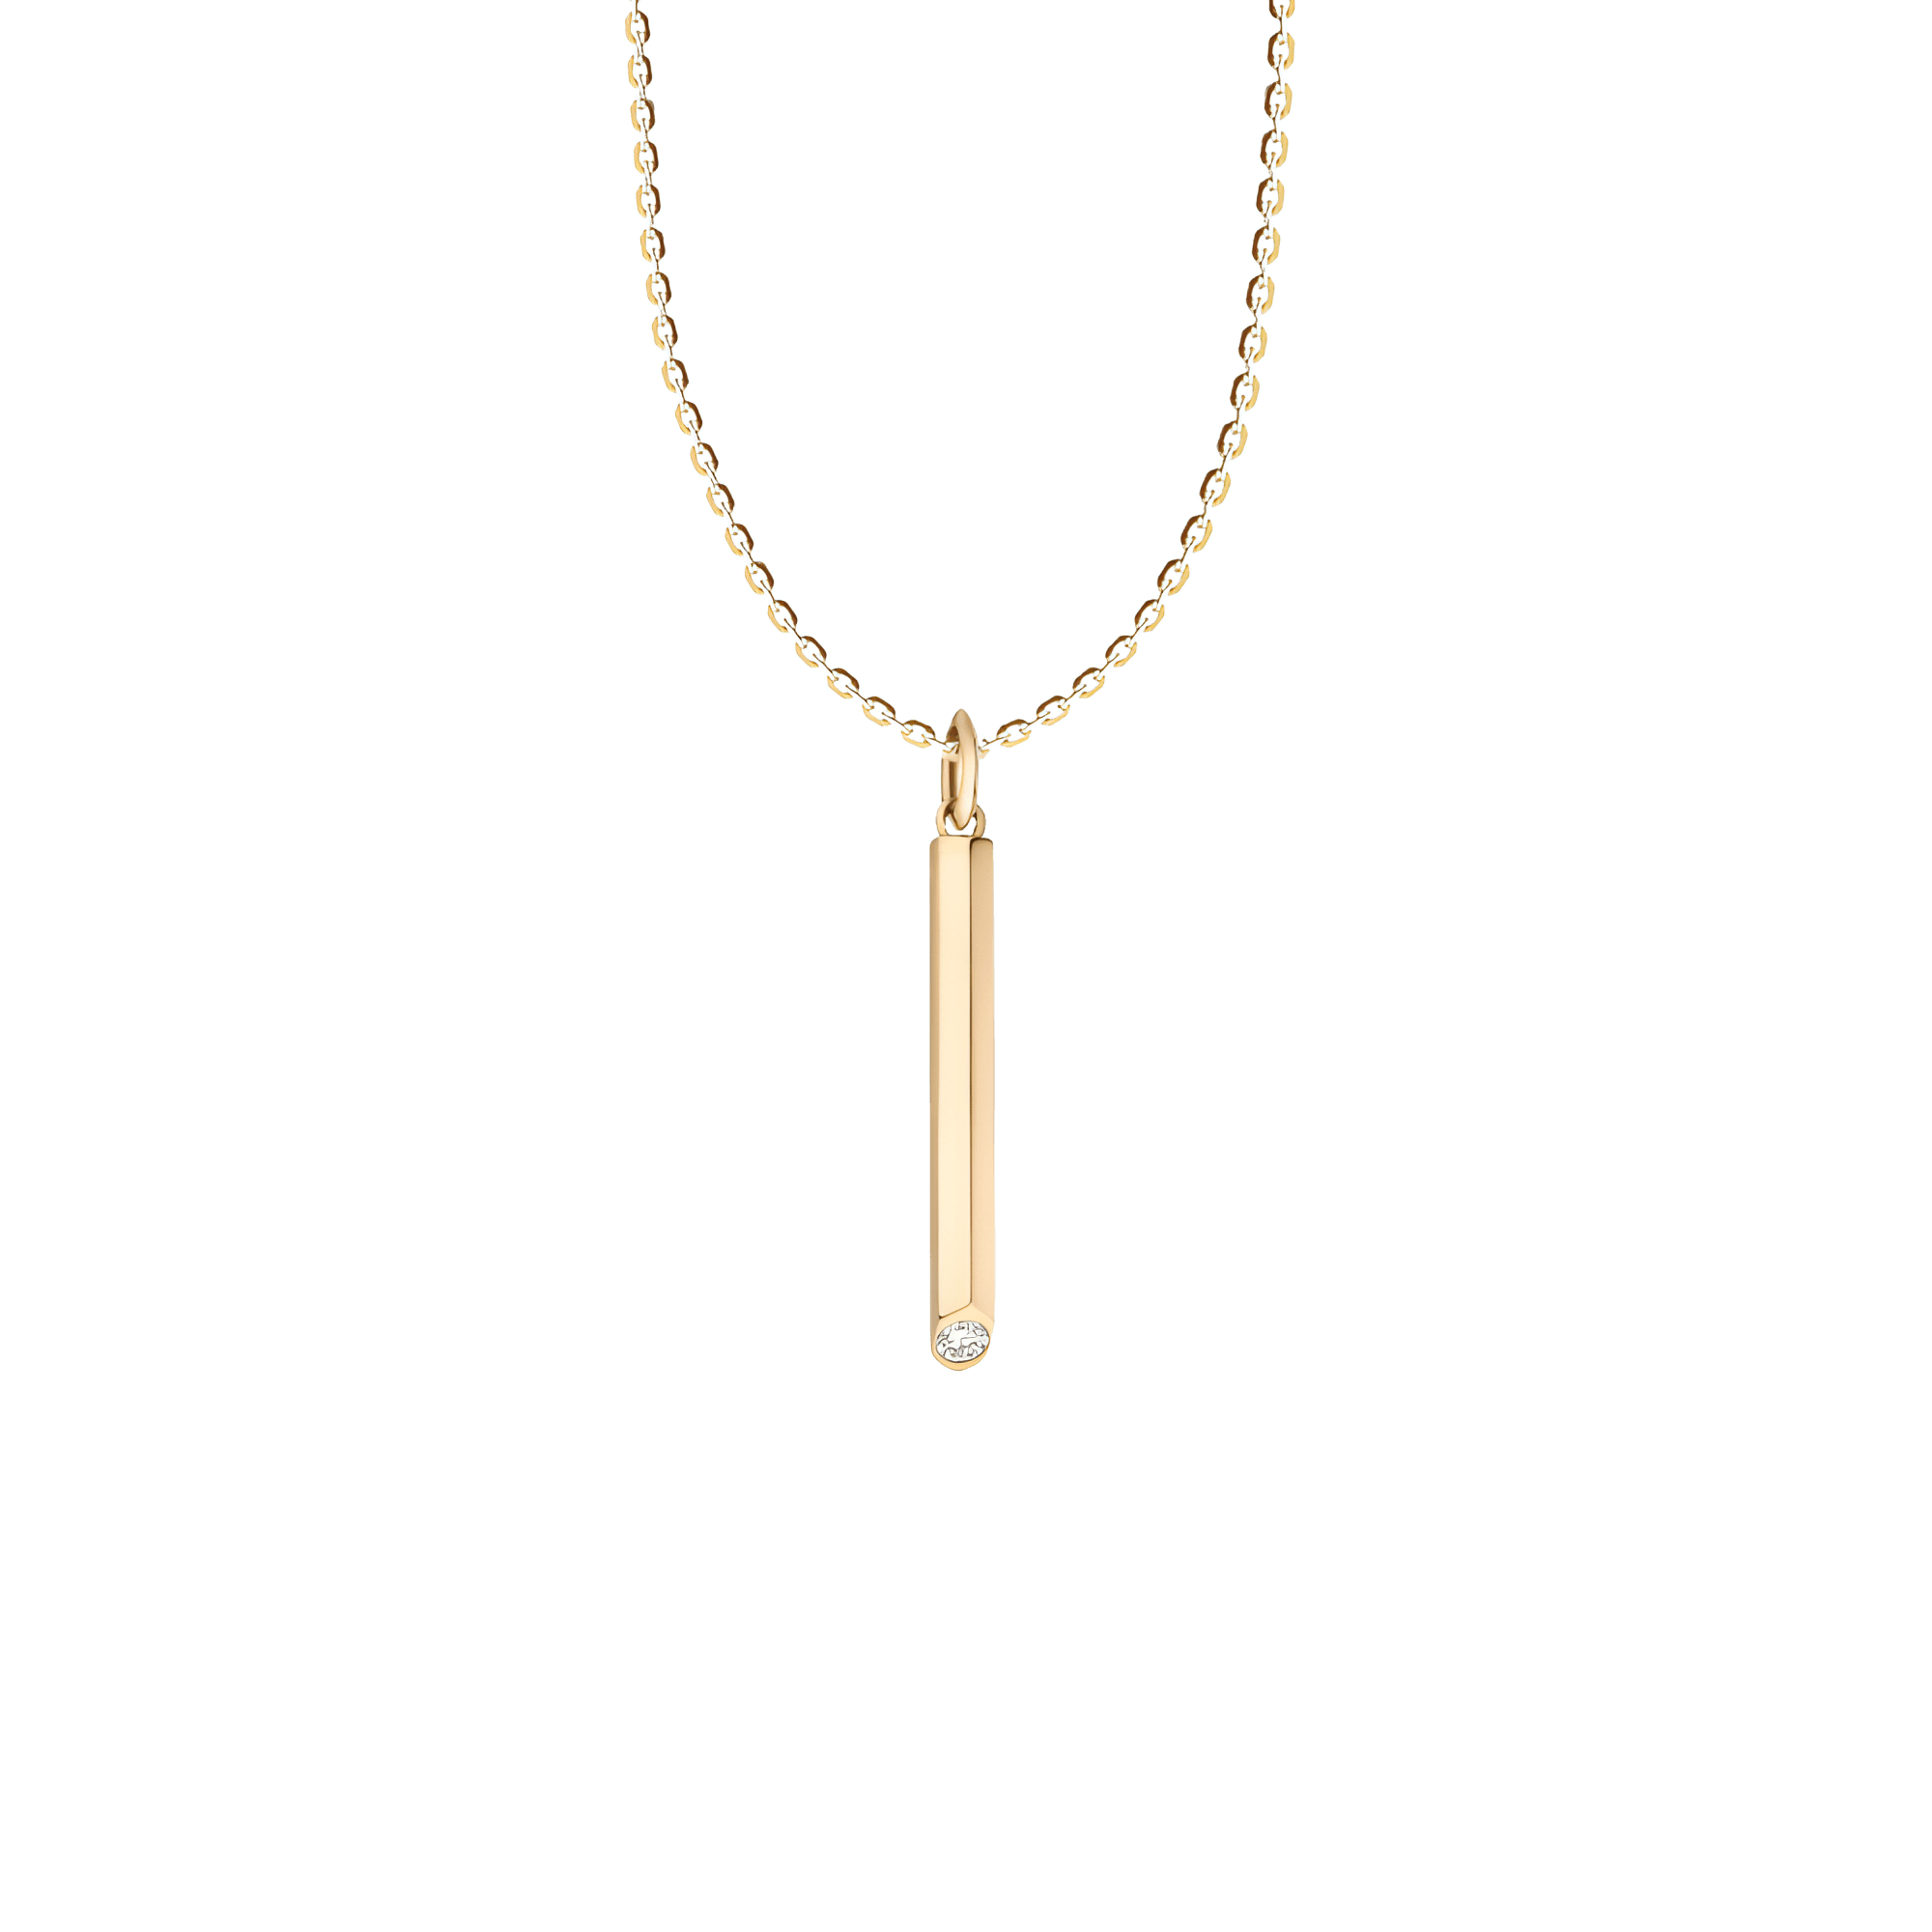 Sunbeam Gold Bar Pendant Necklace | 18K yellow gold / Chain length 420mm / 16.5in / 0.03  | Jewelry | The Future Rocks